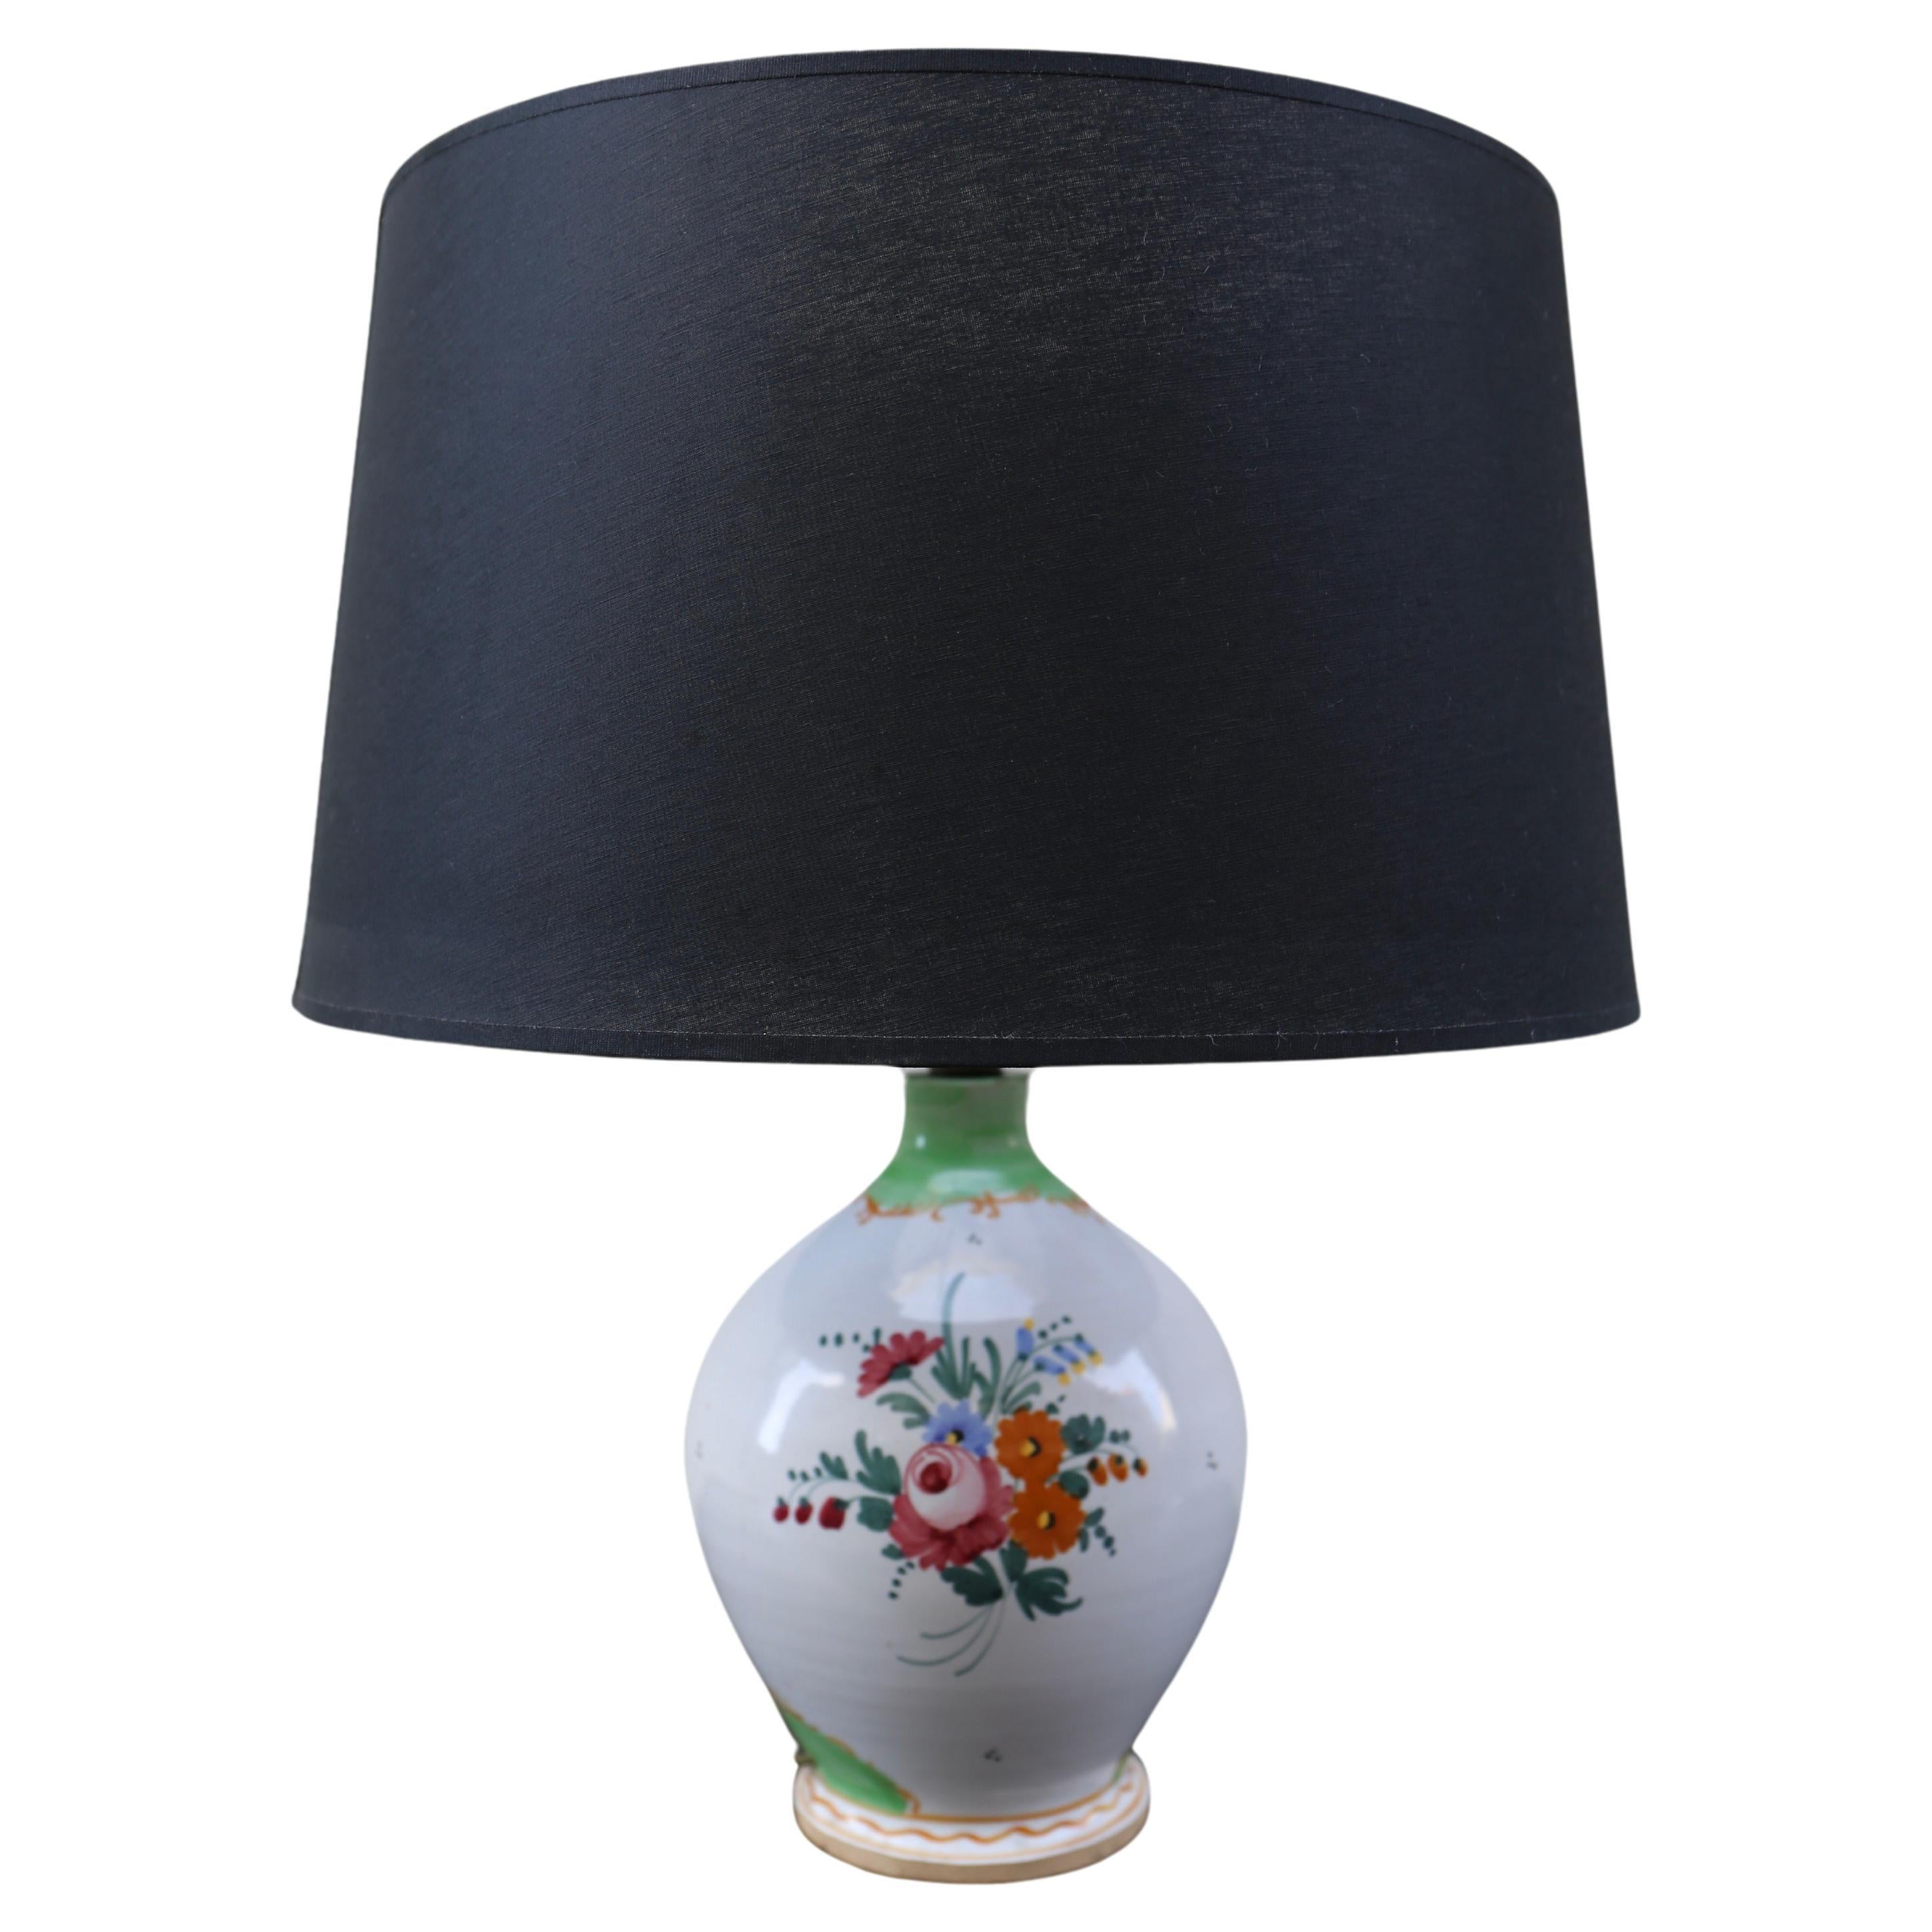 Italian ceramic table lamp vase, decorated with flowers and leaves.

Diameter 6.2